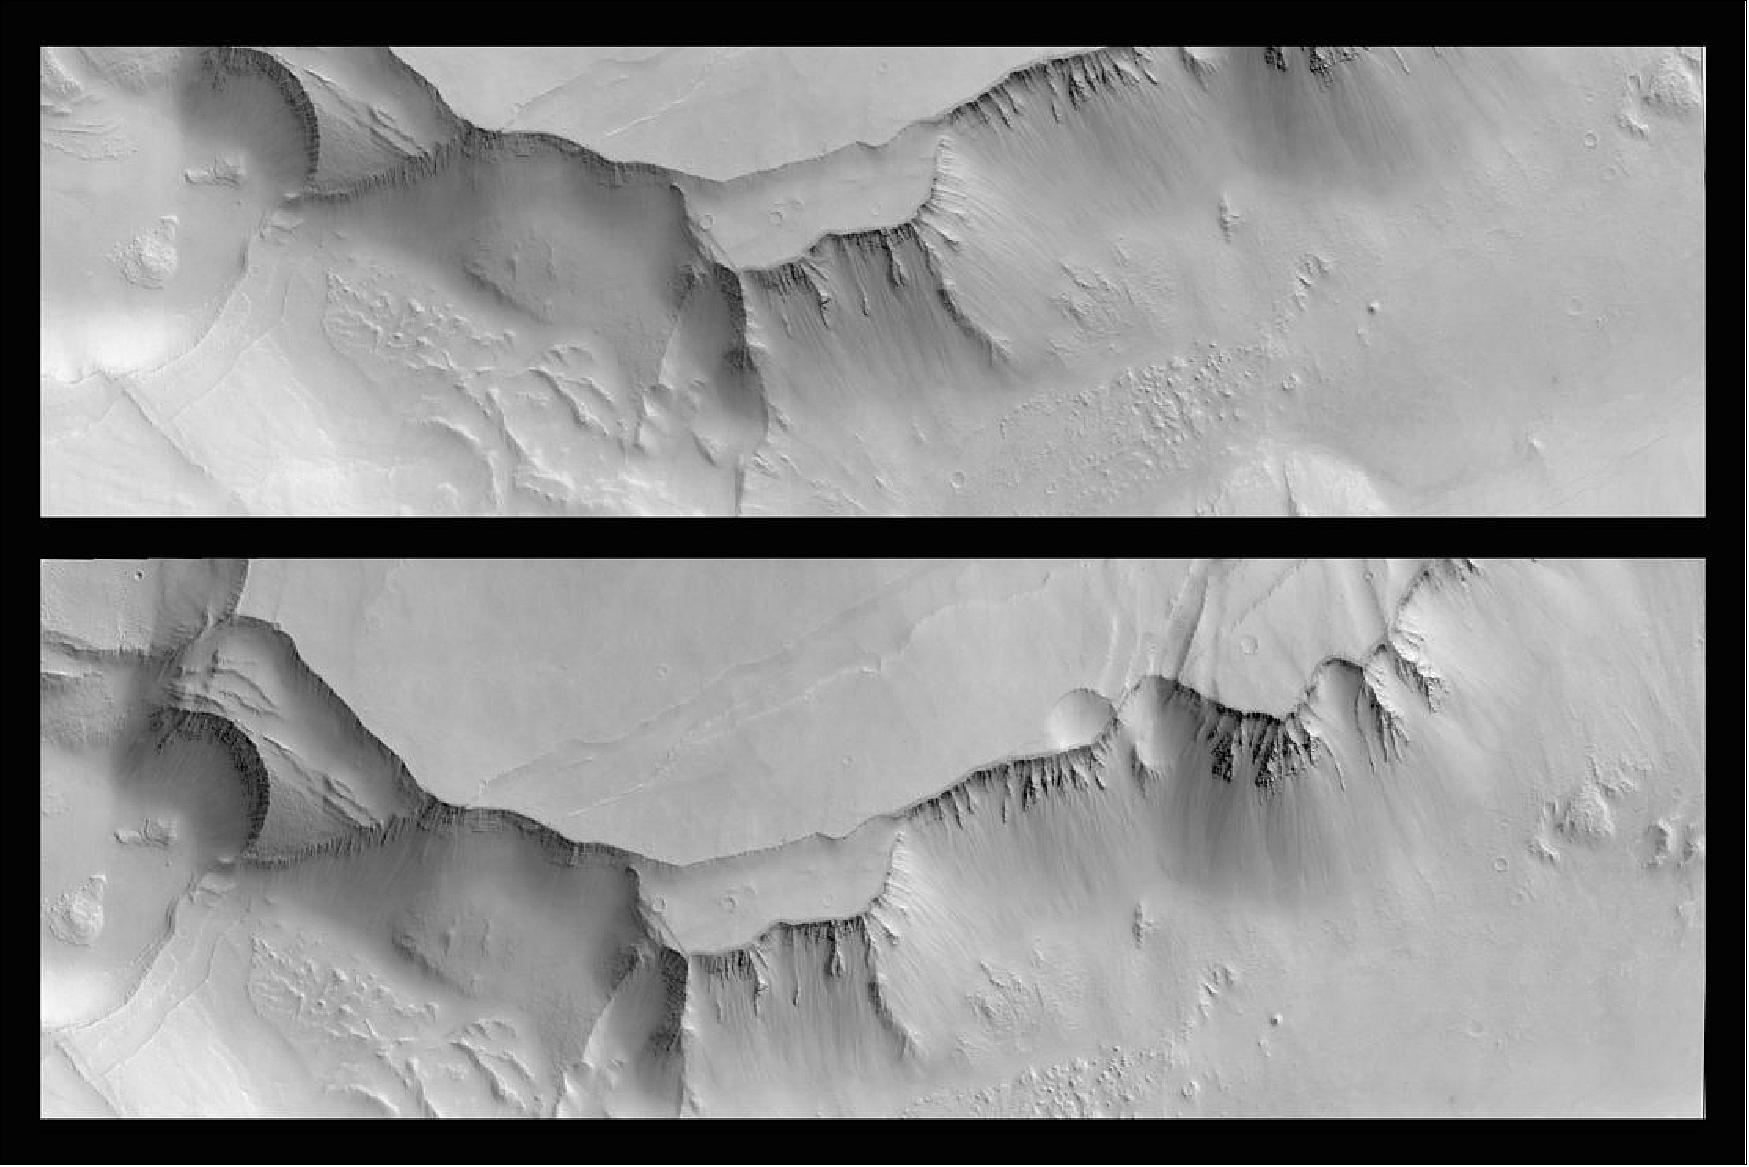 Figure 112: The images together form a stereo pair of part of the Noctis Labyrinthus region of Mars. The camera takes one image looking slightly forwards (bottom image in this orientation, acquired on Nov. 22, 2016), and then, after having flown over the area, it rotates to look ‘back’ to take the second part of the image (top), in order to see the same region of the surface from two different angles (image credit: ESA/Roscosmos/CaSSIS – CC BY-SA IGO 3.0)